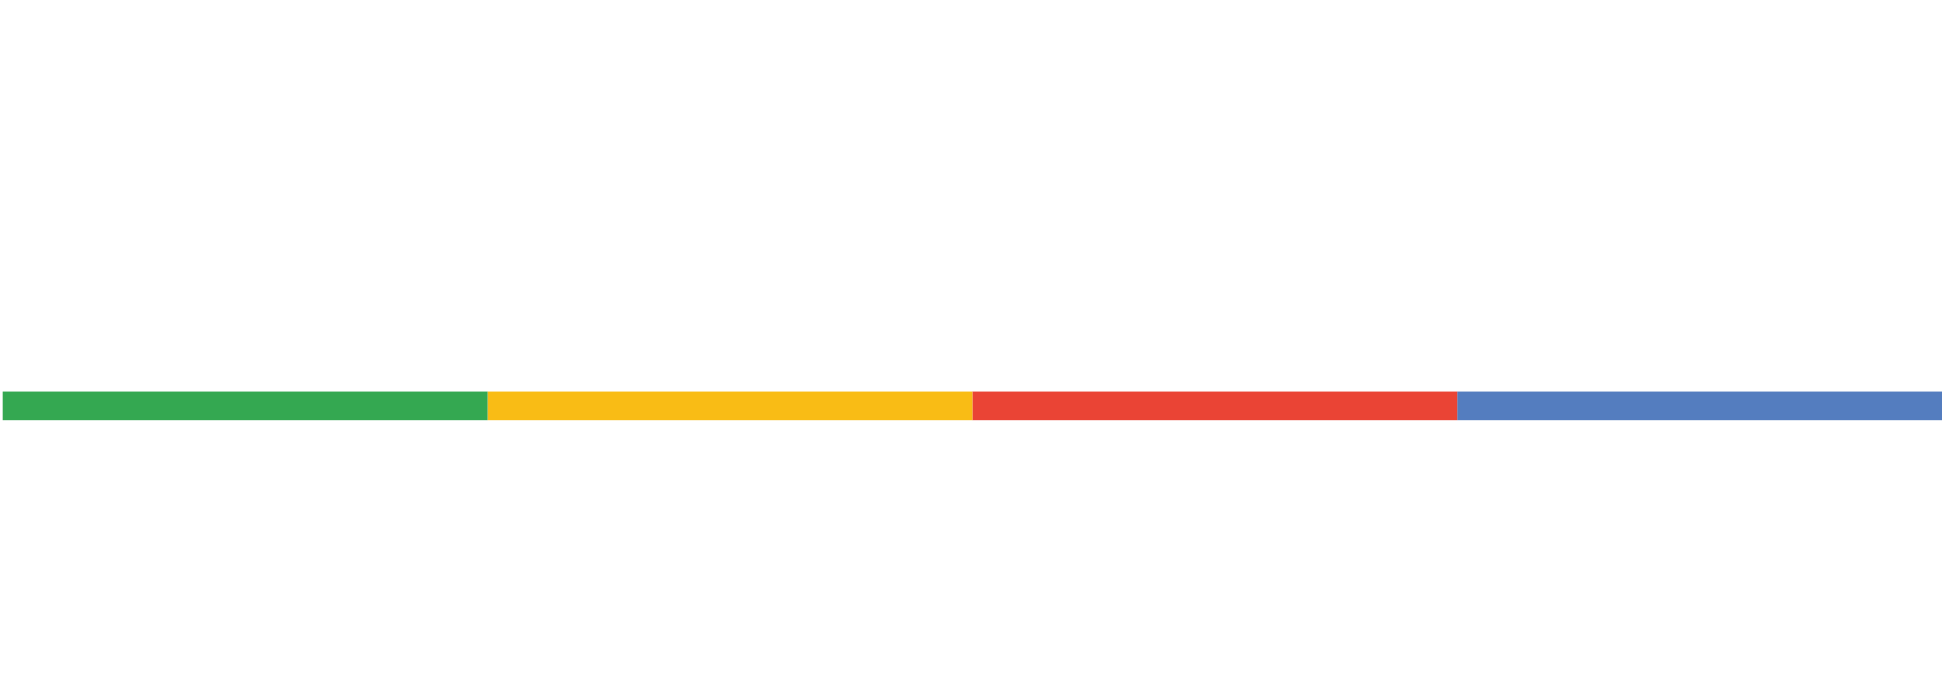 Chasing Business Solutions